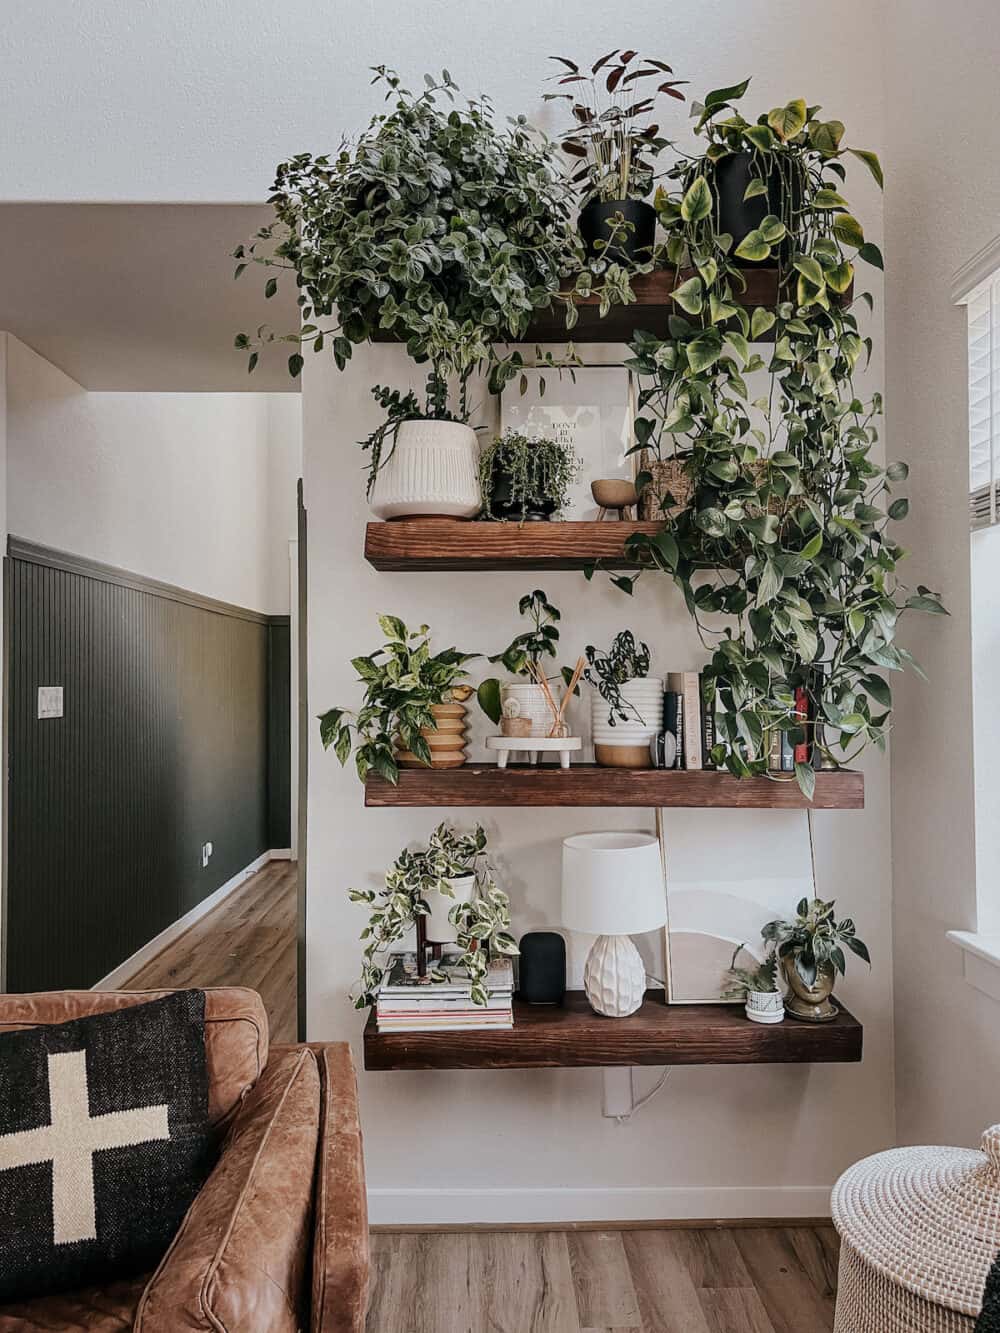 Floating shelves with lots of plants
